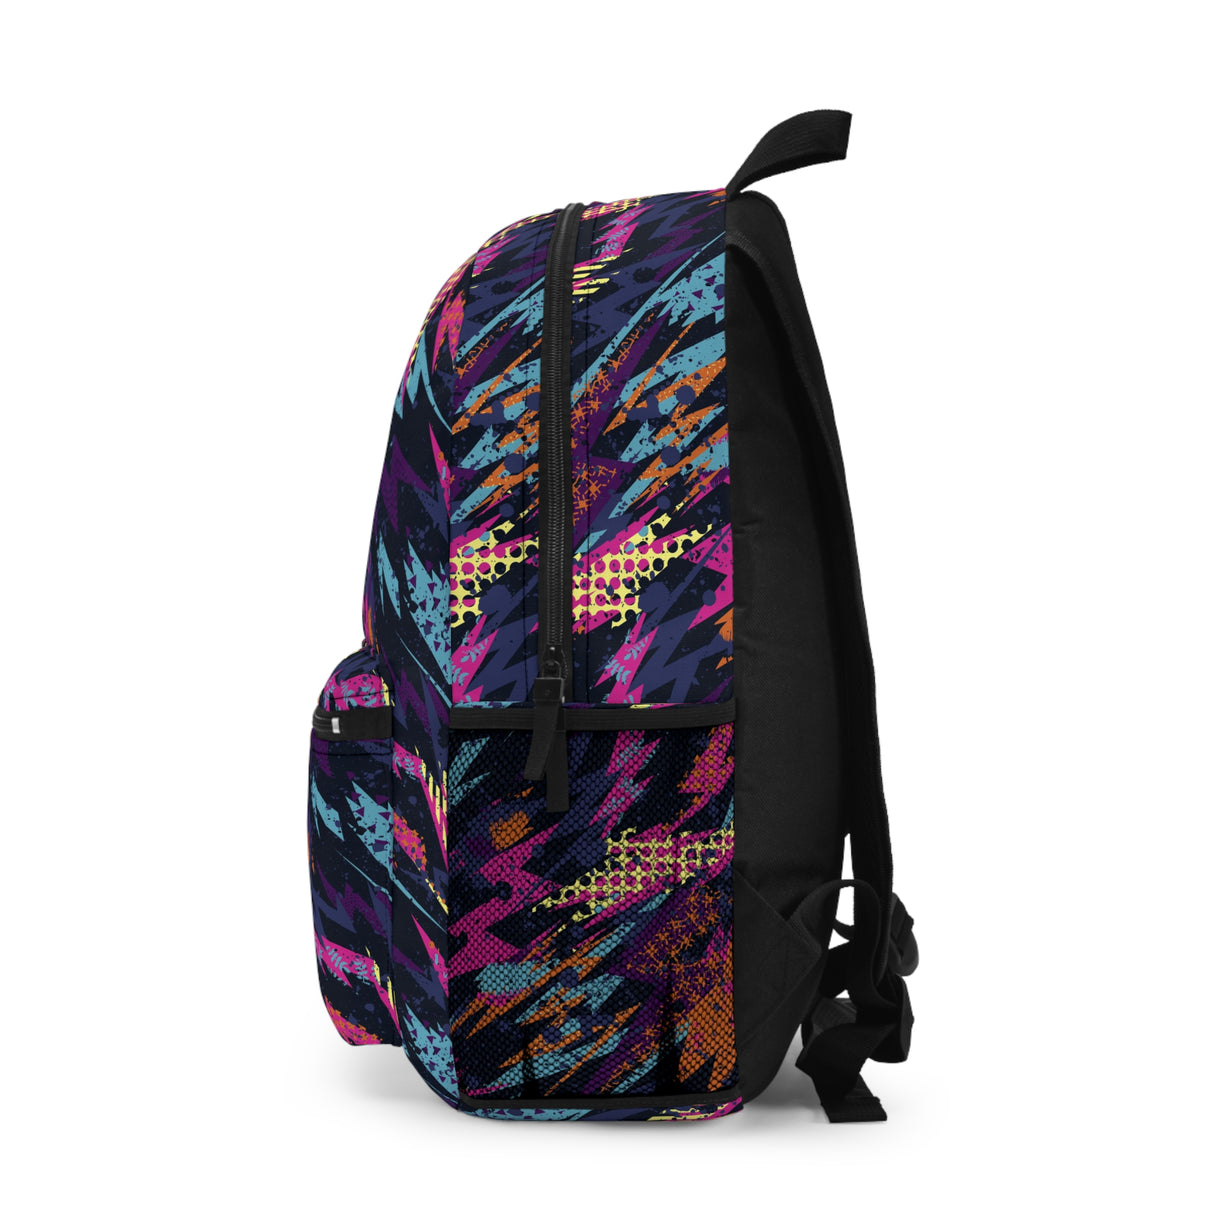 Kids Abstract Shapes 2 Multi Color Backpack